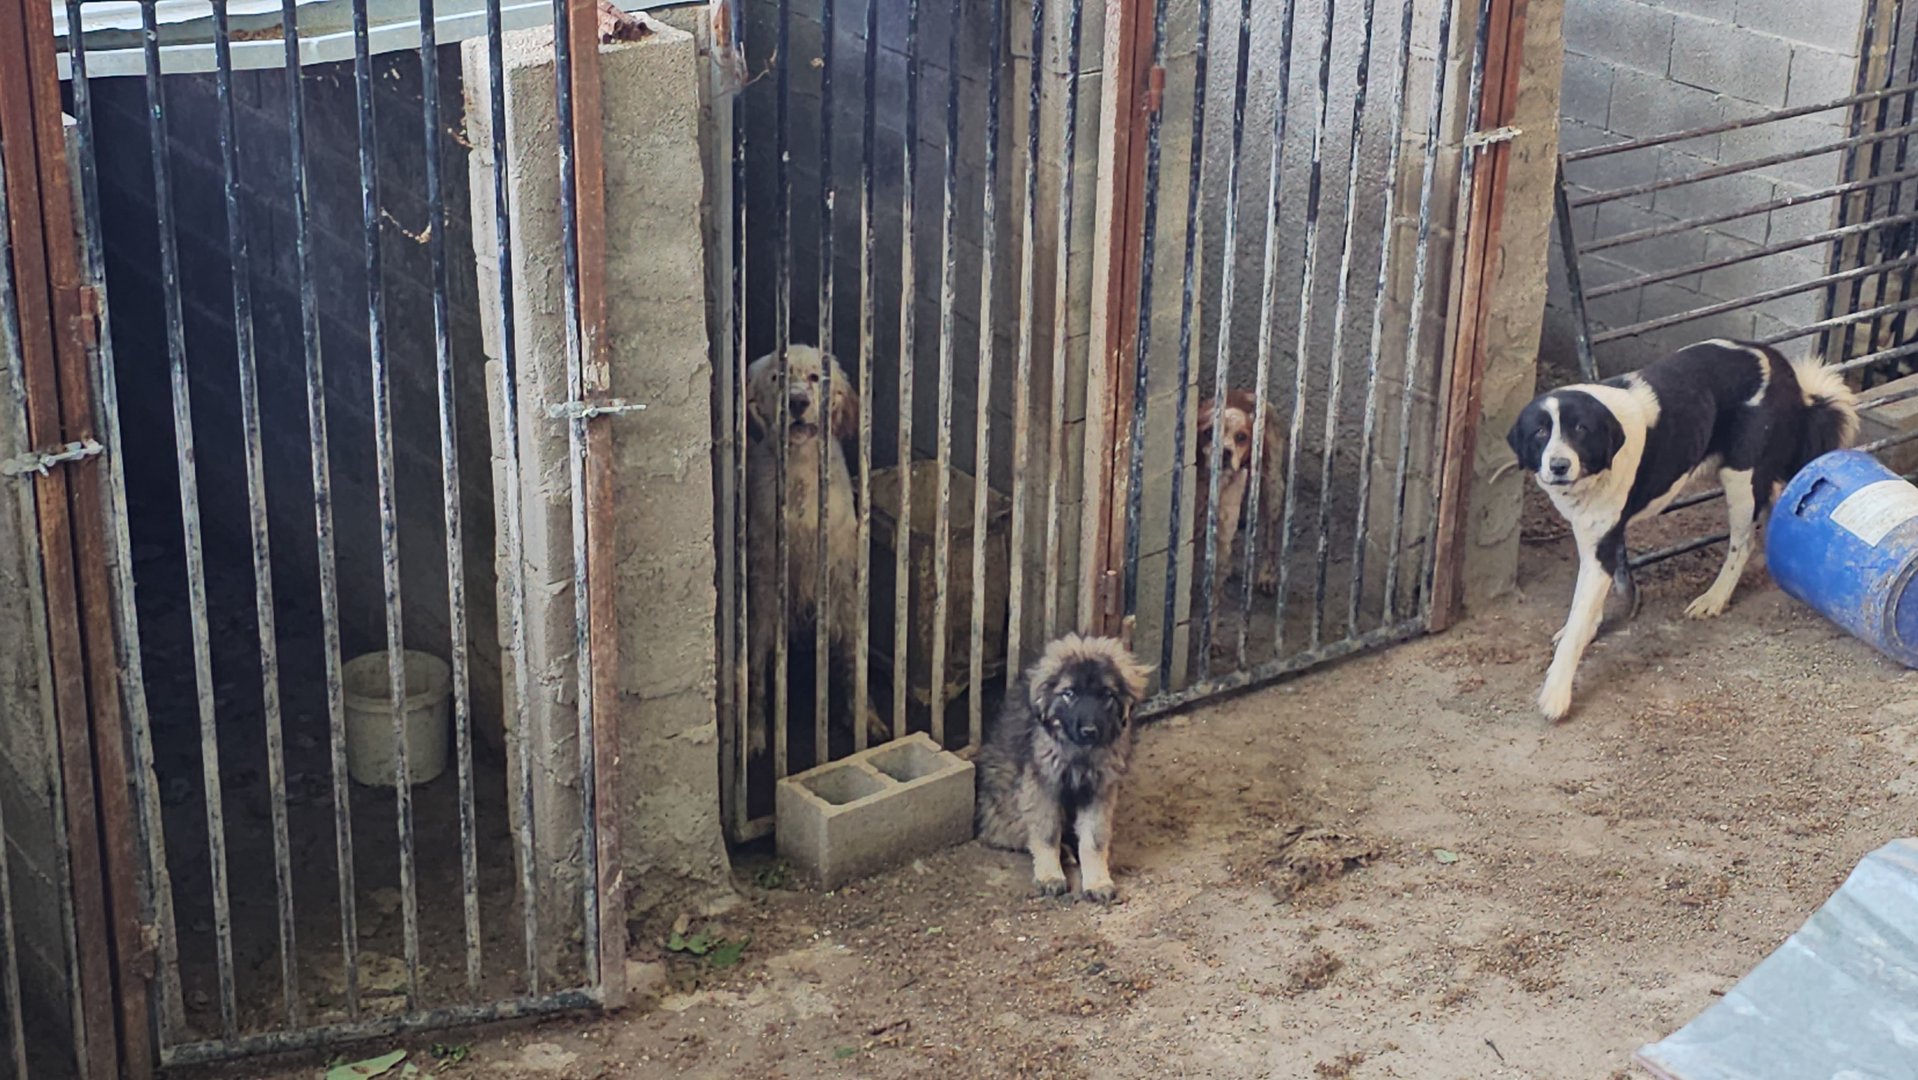 Report to the police about dogs being hoarded in horrible conditions 